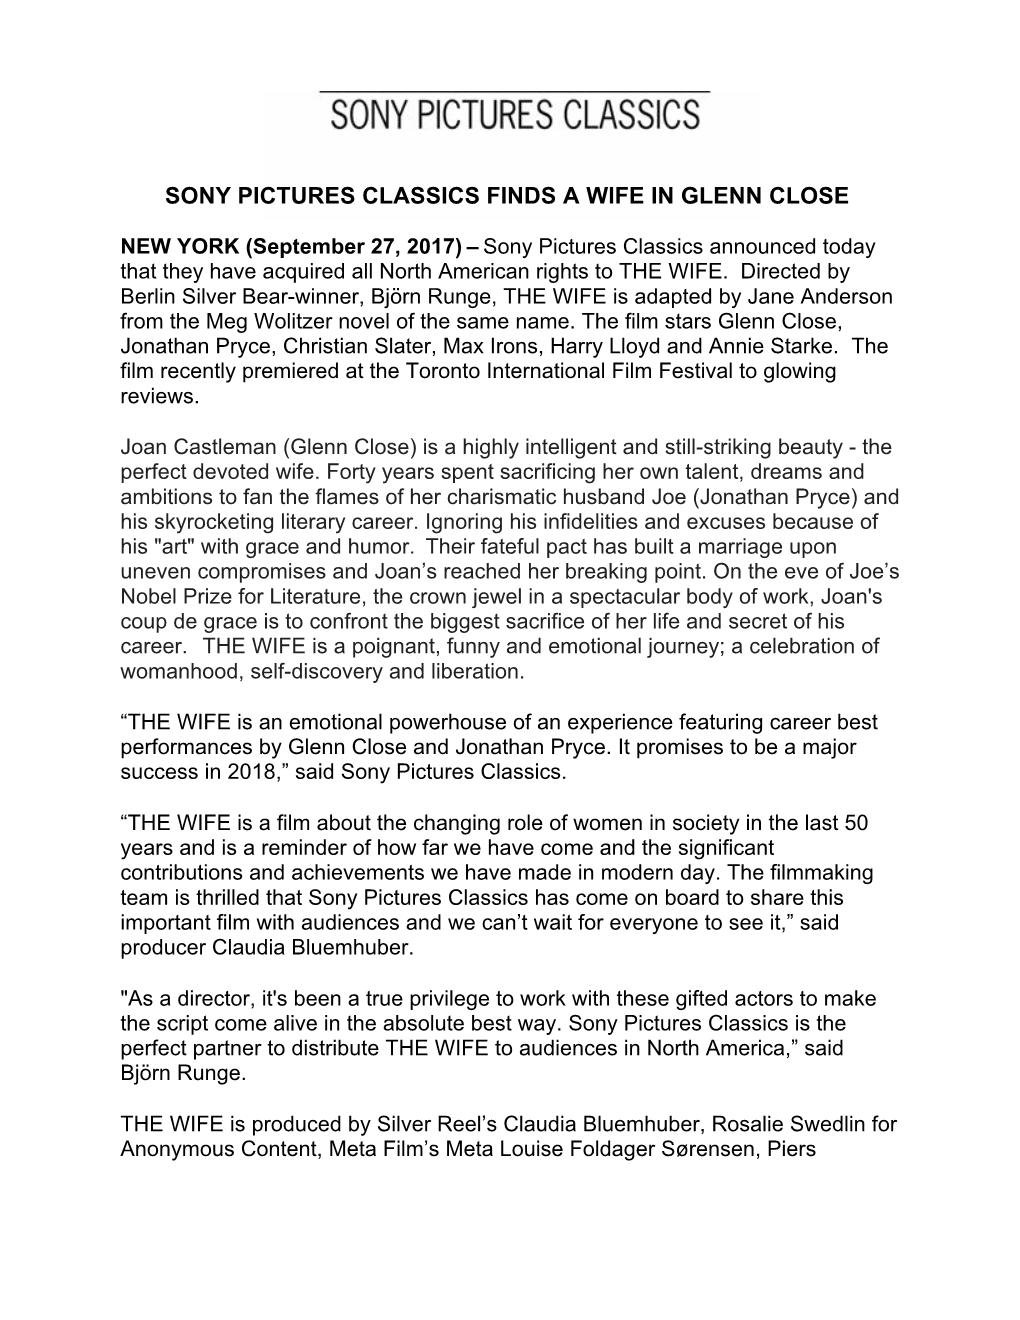 Sony Pictures Classics Finds a Wife in Glenn Close